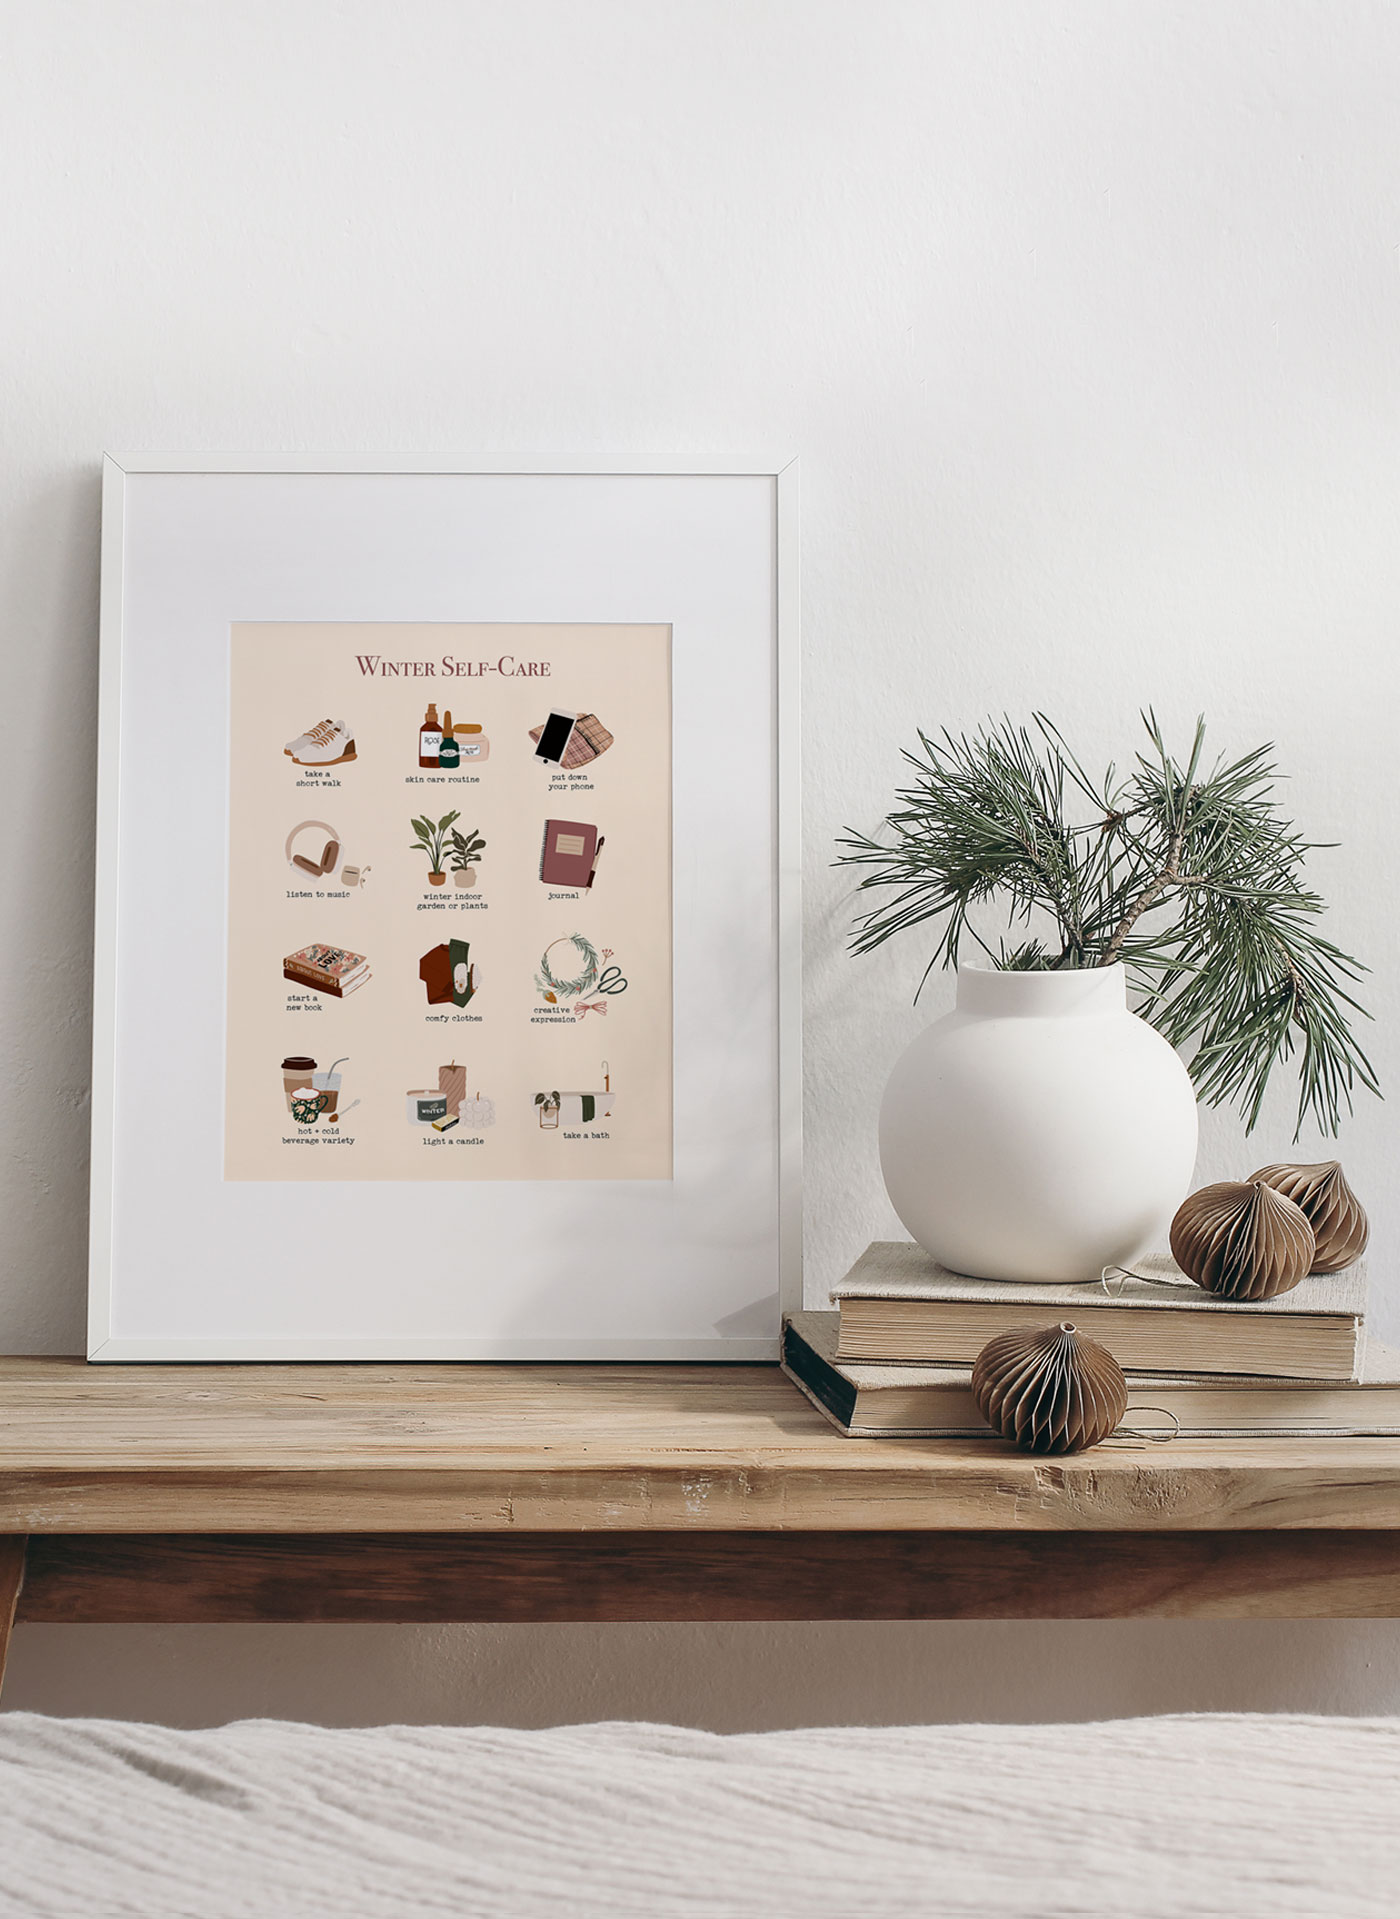 Styled printable in a frame